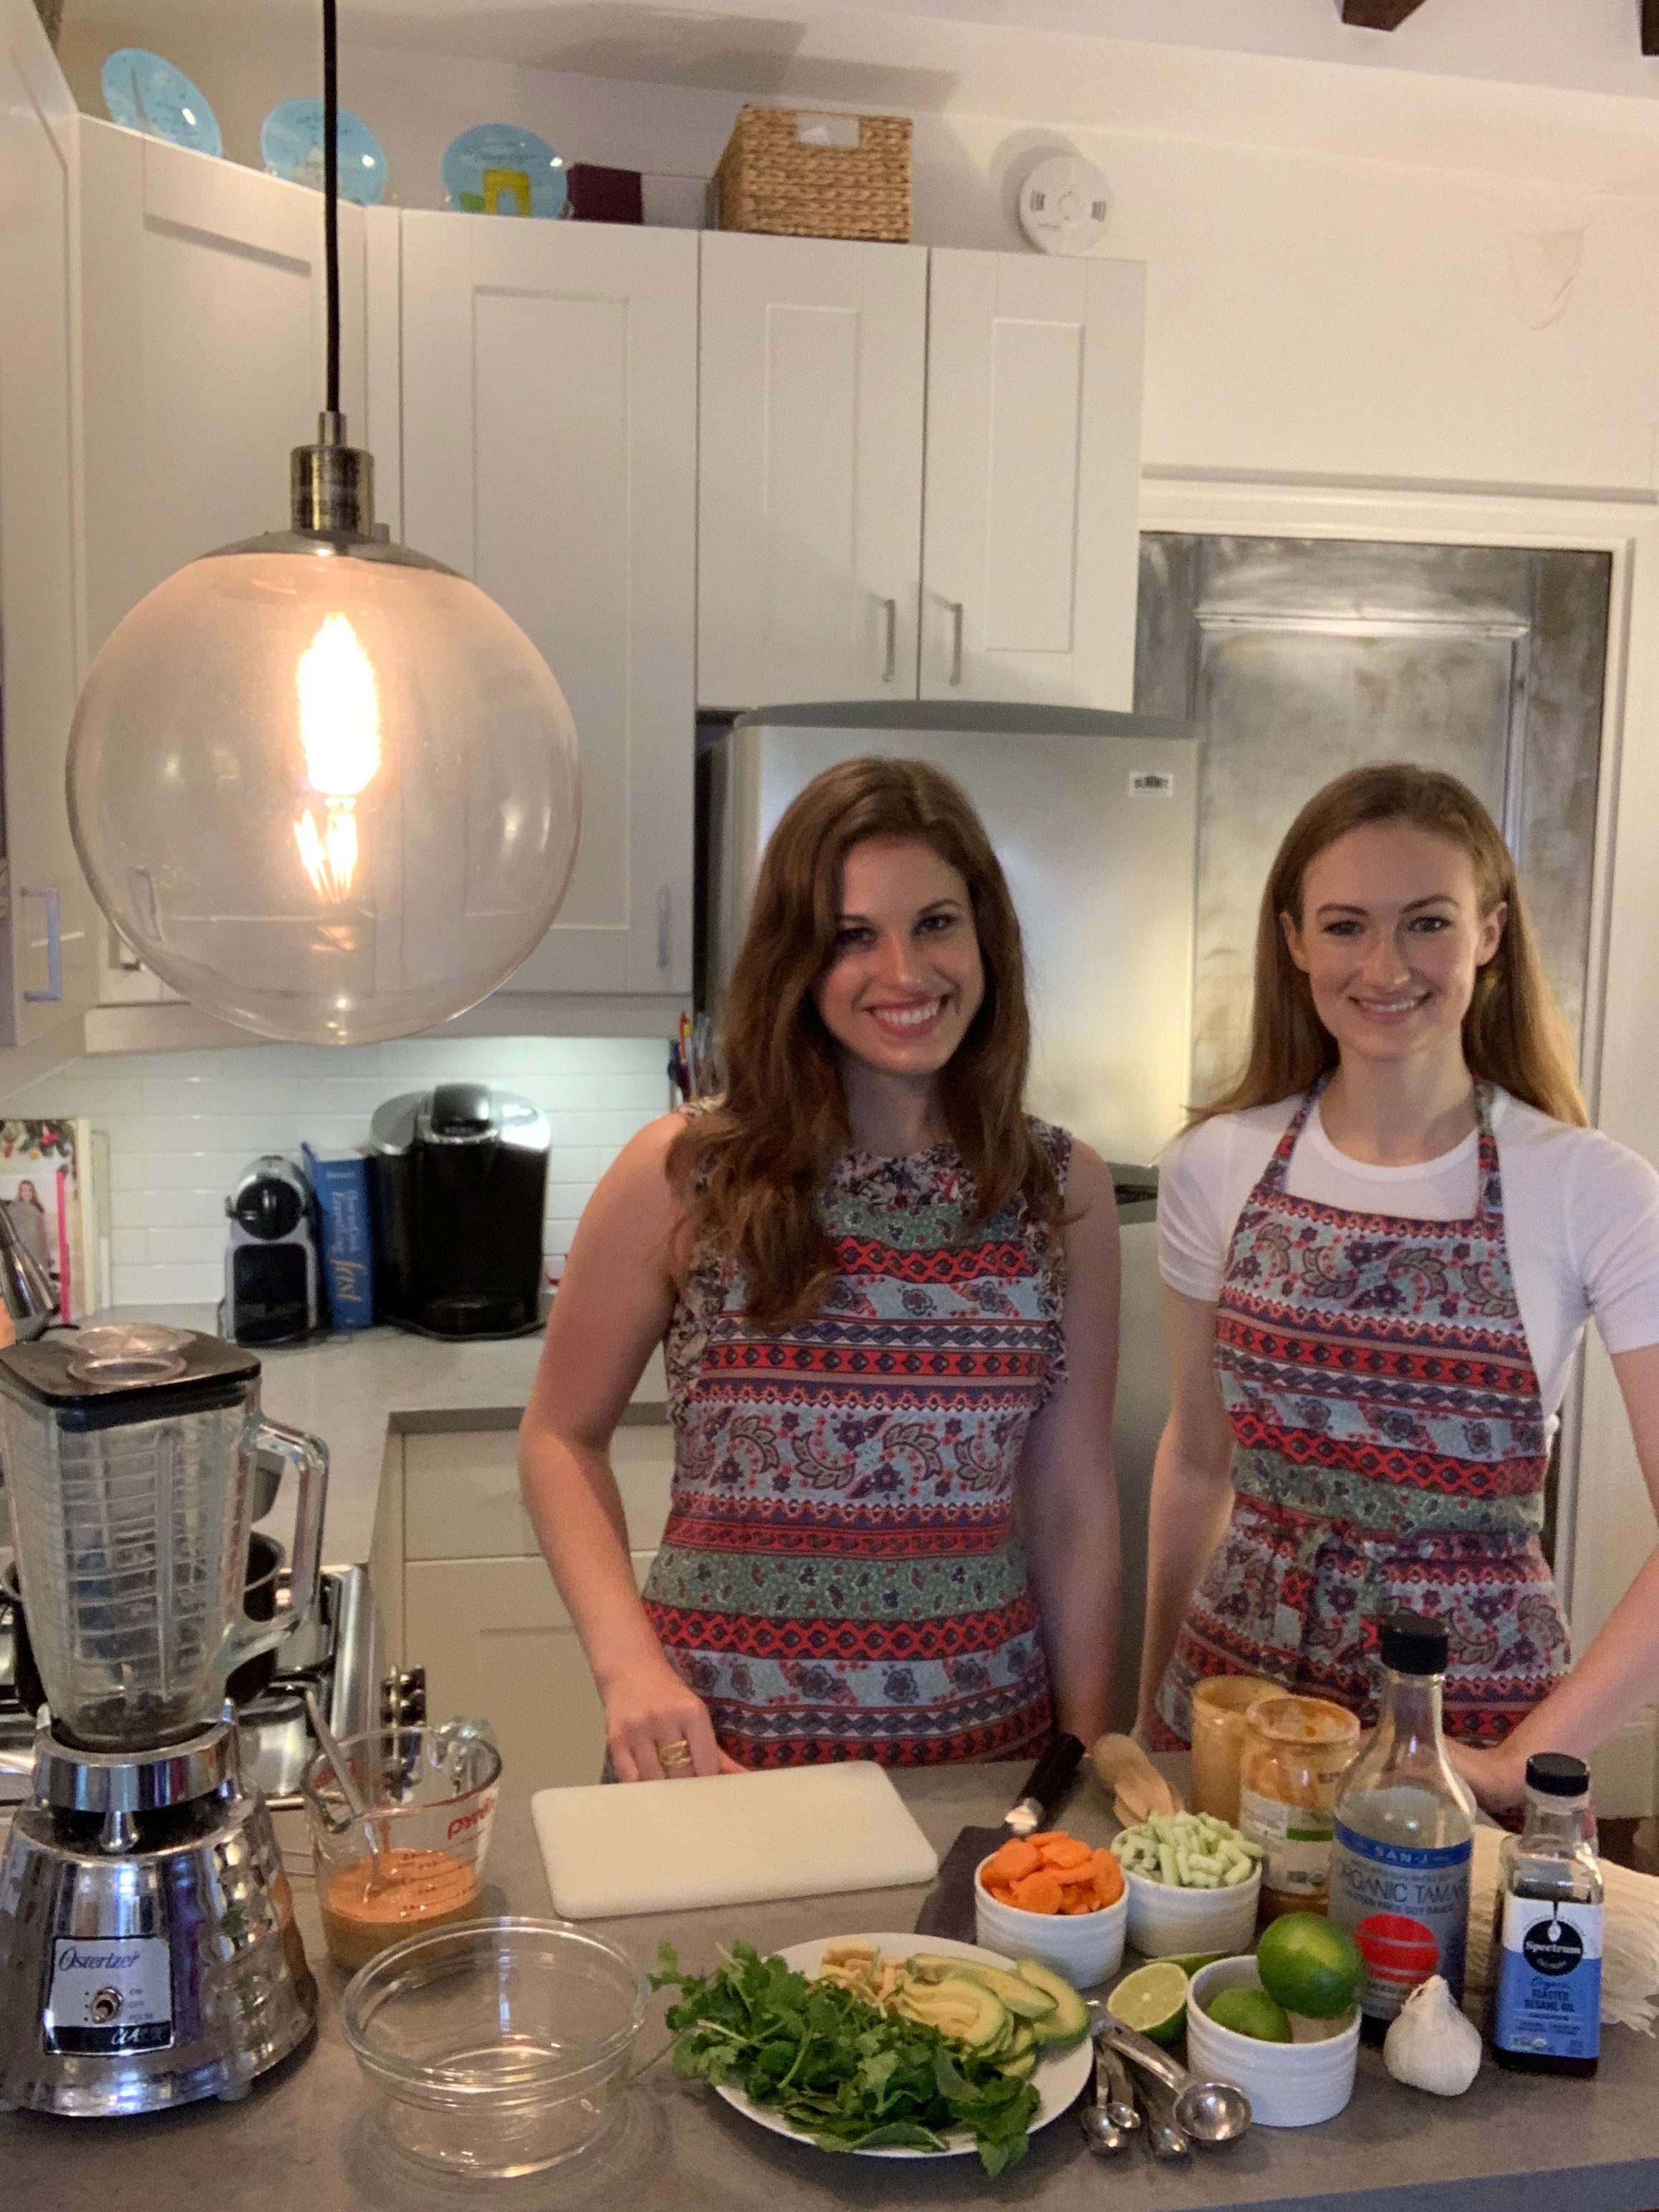 Two girls in a kitchen wearing printed aprons. One has curly brown hair and the other has blonde hair